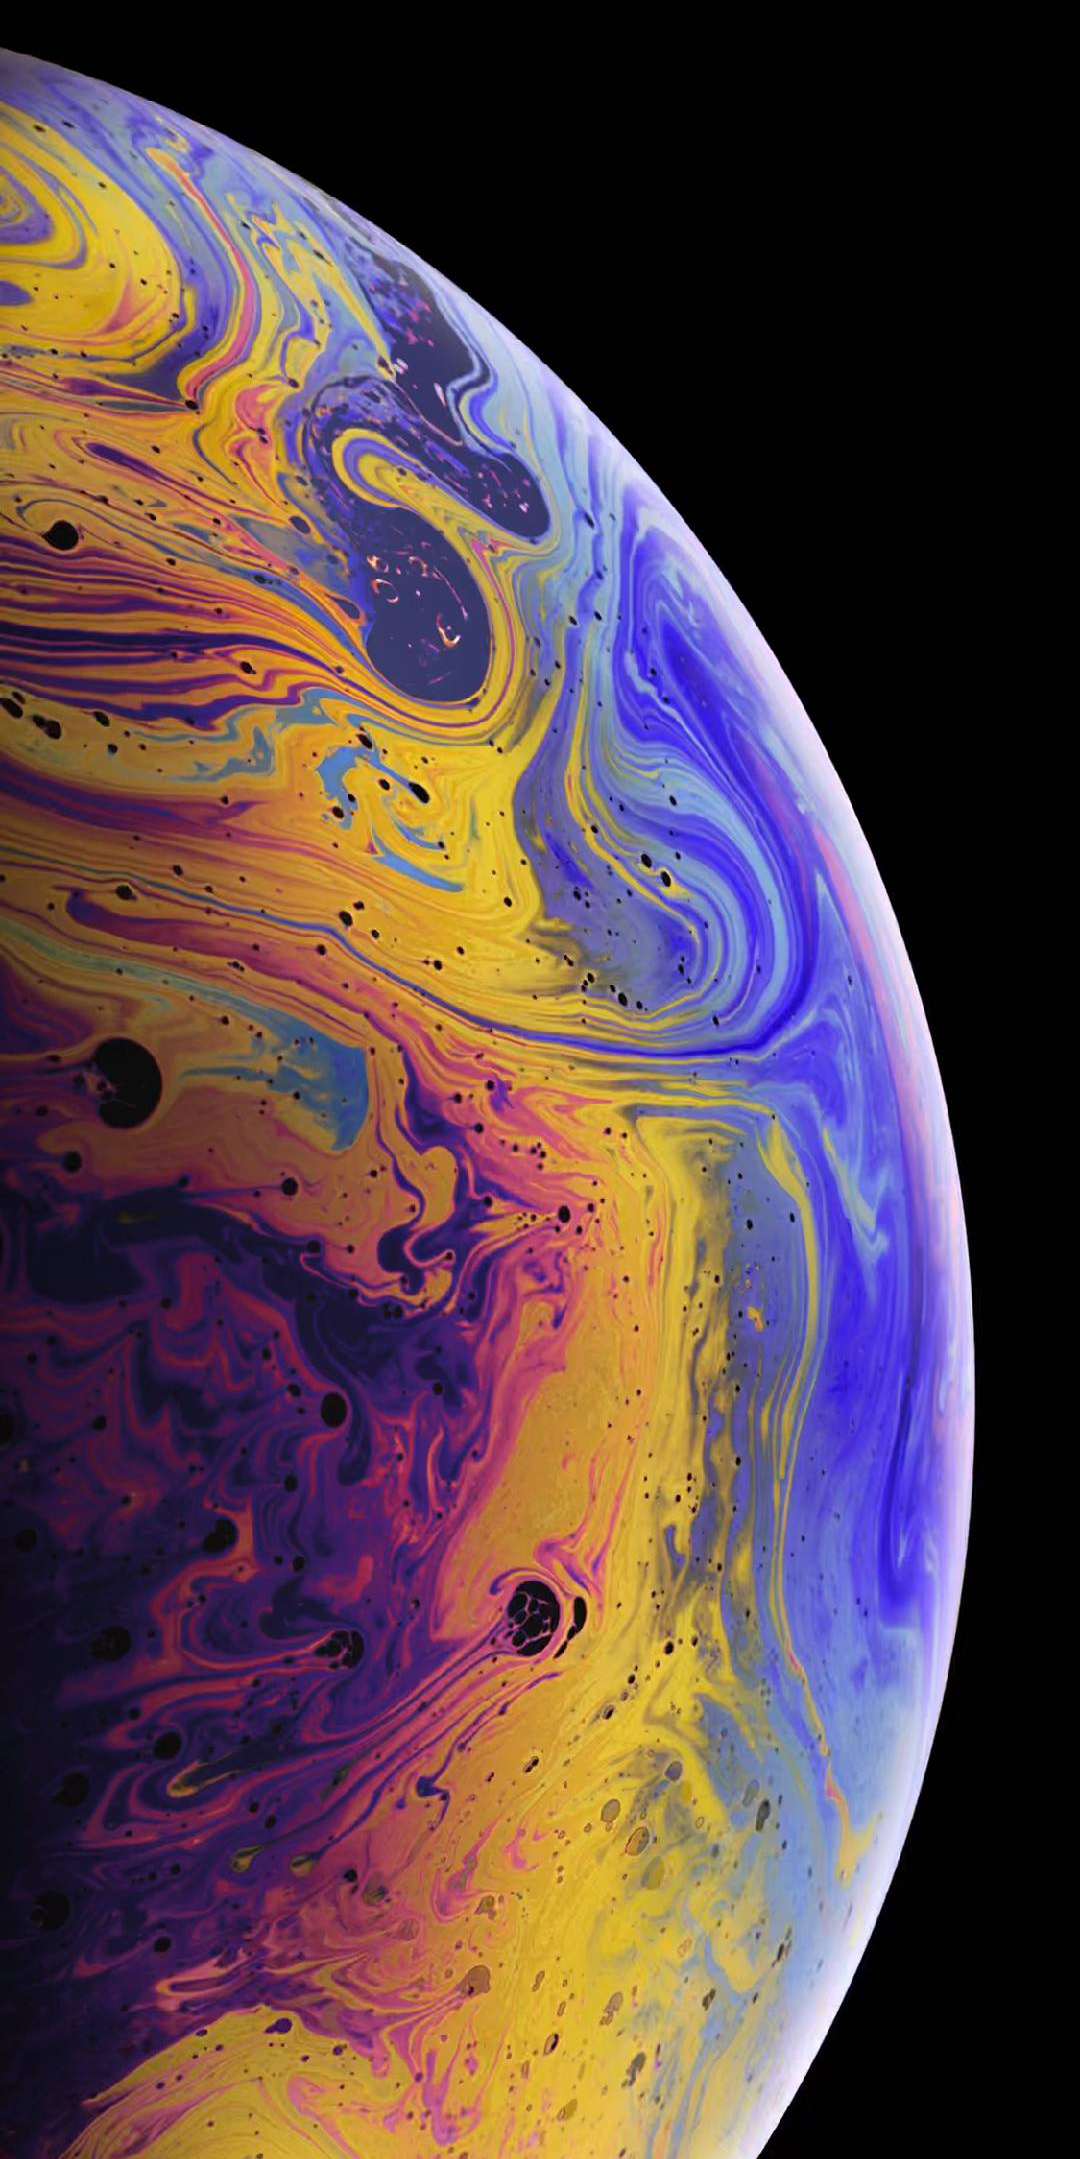 IPhone XR Stock Wallpaper - IPhone Wallpapers : iPhone Wallpapers